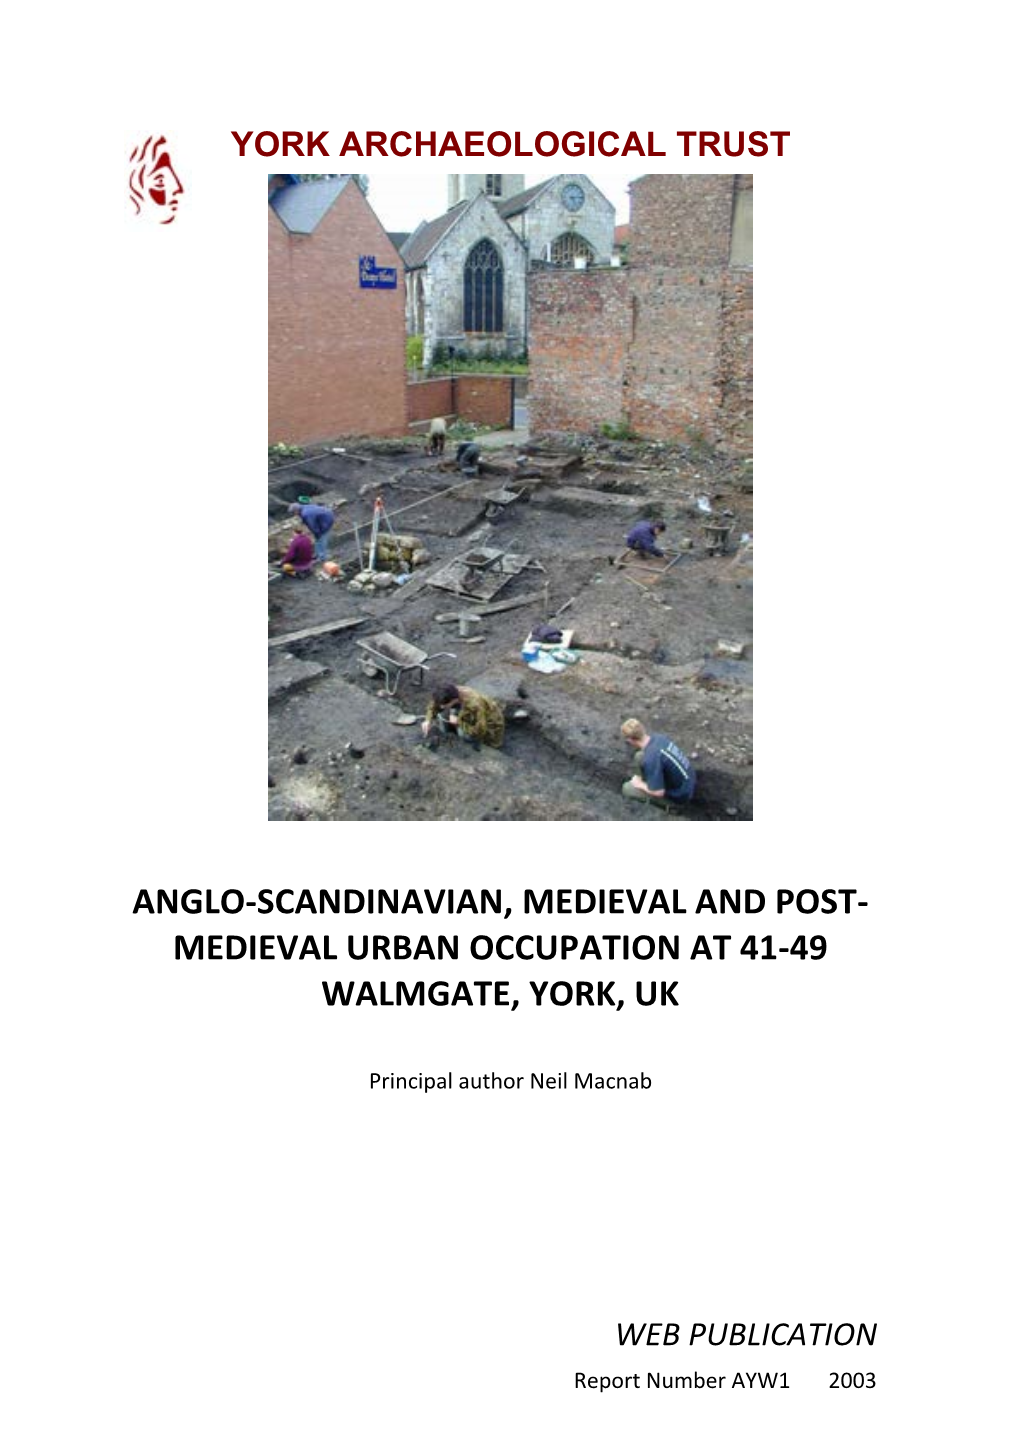 Anglo-Scandinavian, Medieval and Post- Medieval Urban Occupation at 41-49 Walmgate, York, Uk